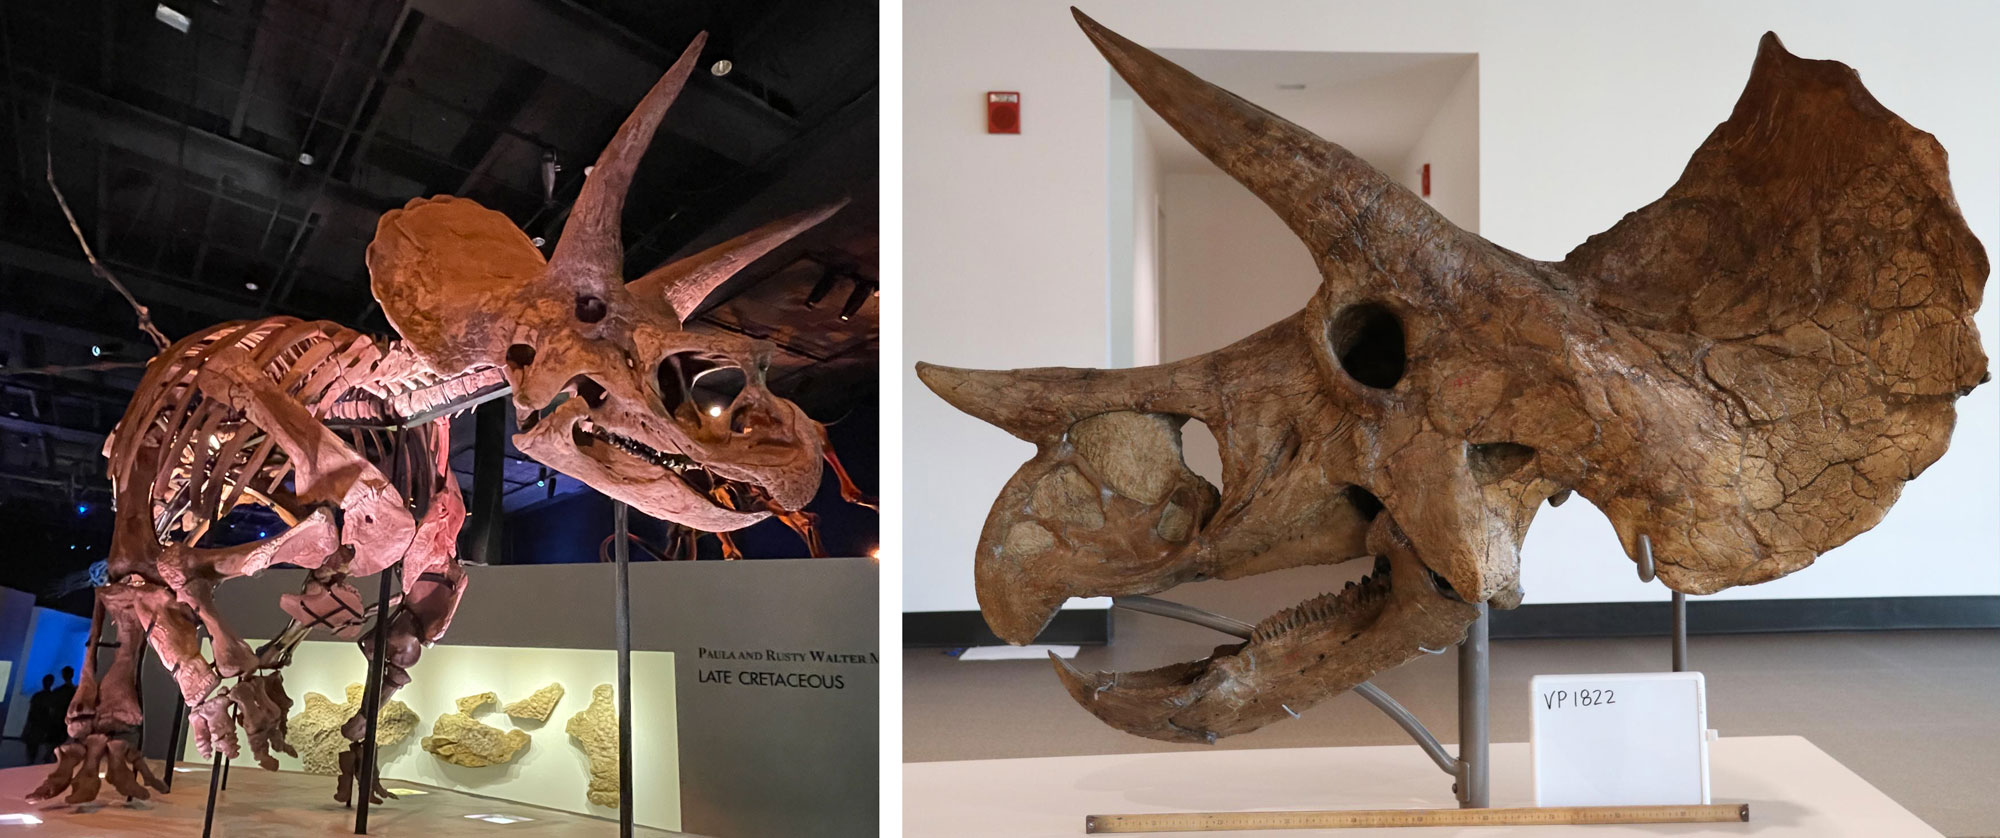 2-panel figure made up of photographs of Triceratops specimens. Panel 1: A Triceratops horridus skeleton on display in a museum. The animal is on four legs, with a thick body and extended tail. The head has three horns, two long horns above the eyes, one shorter horn on the nose. A frill extends up and back from the rear of the skull. Panel 2: Side view of a Triceratops prorsus skull. The skull has three horns, two long horns above the eyes, one shorter horn on the nose. A frill extends up and back from the rear of the skull. The front of the mouth looks beak-like.